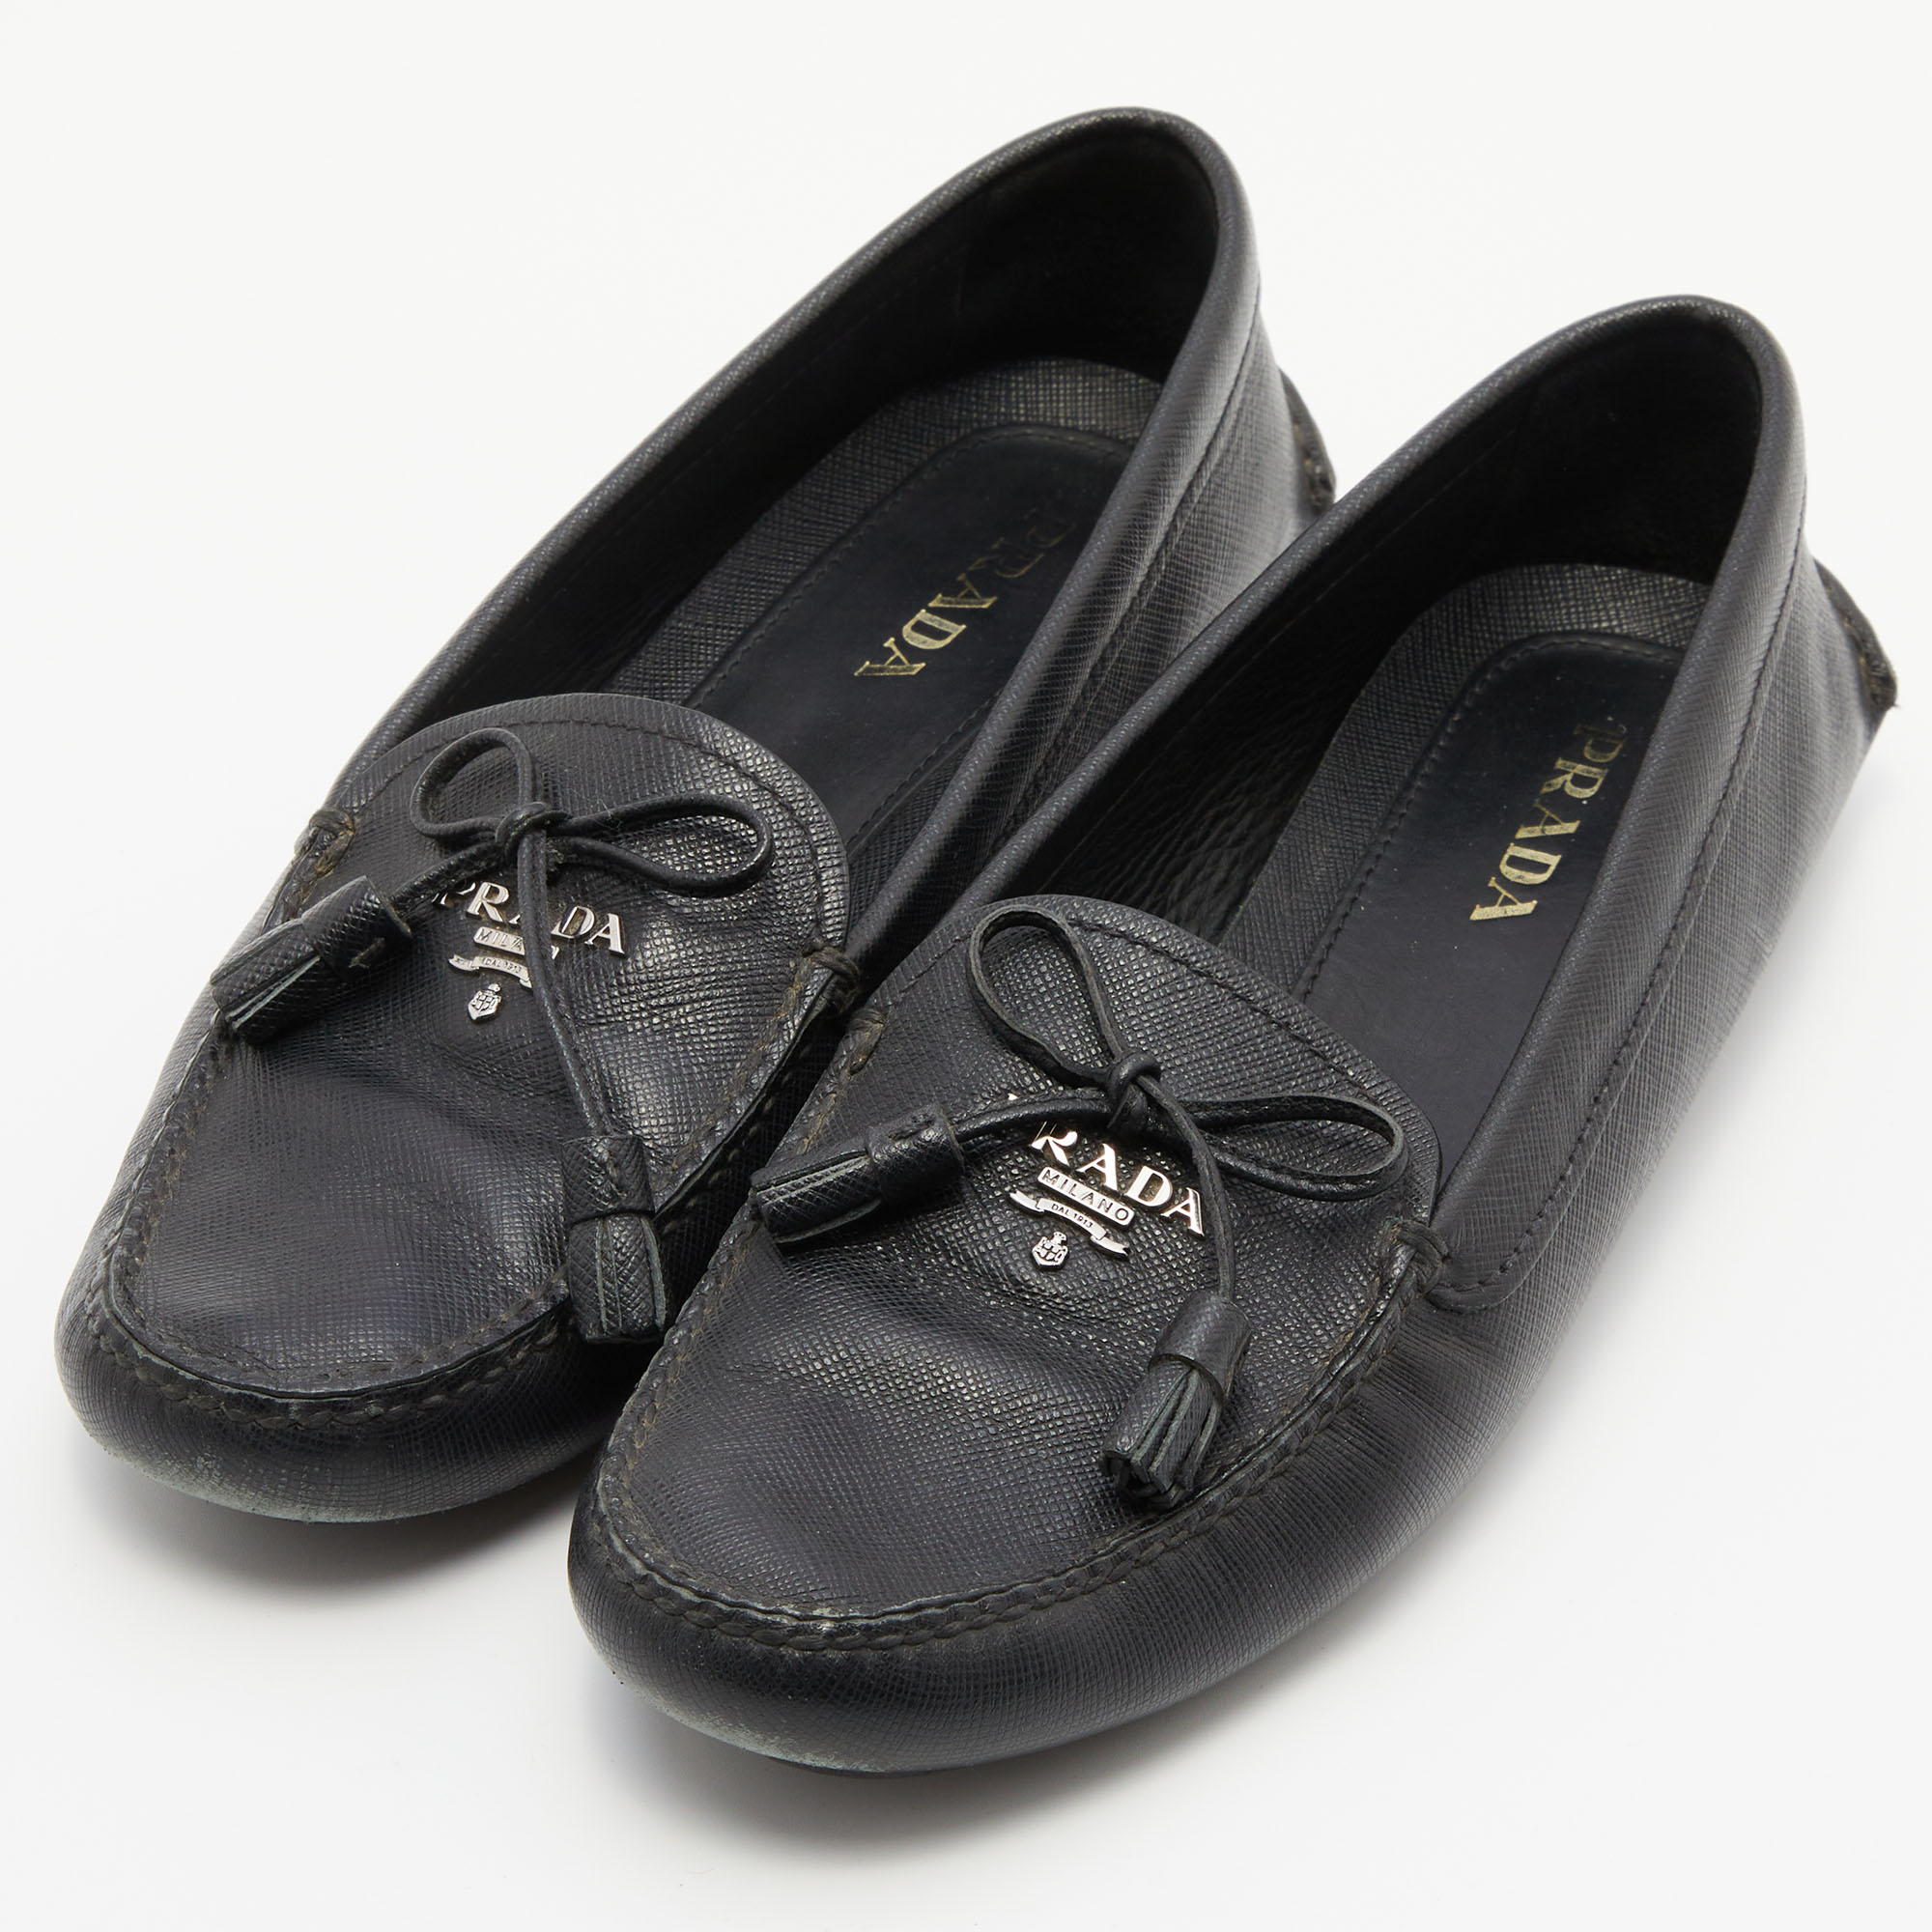 

Prada Black Leather Bow Detail Loafers Size